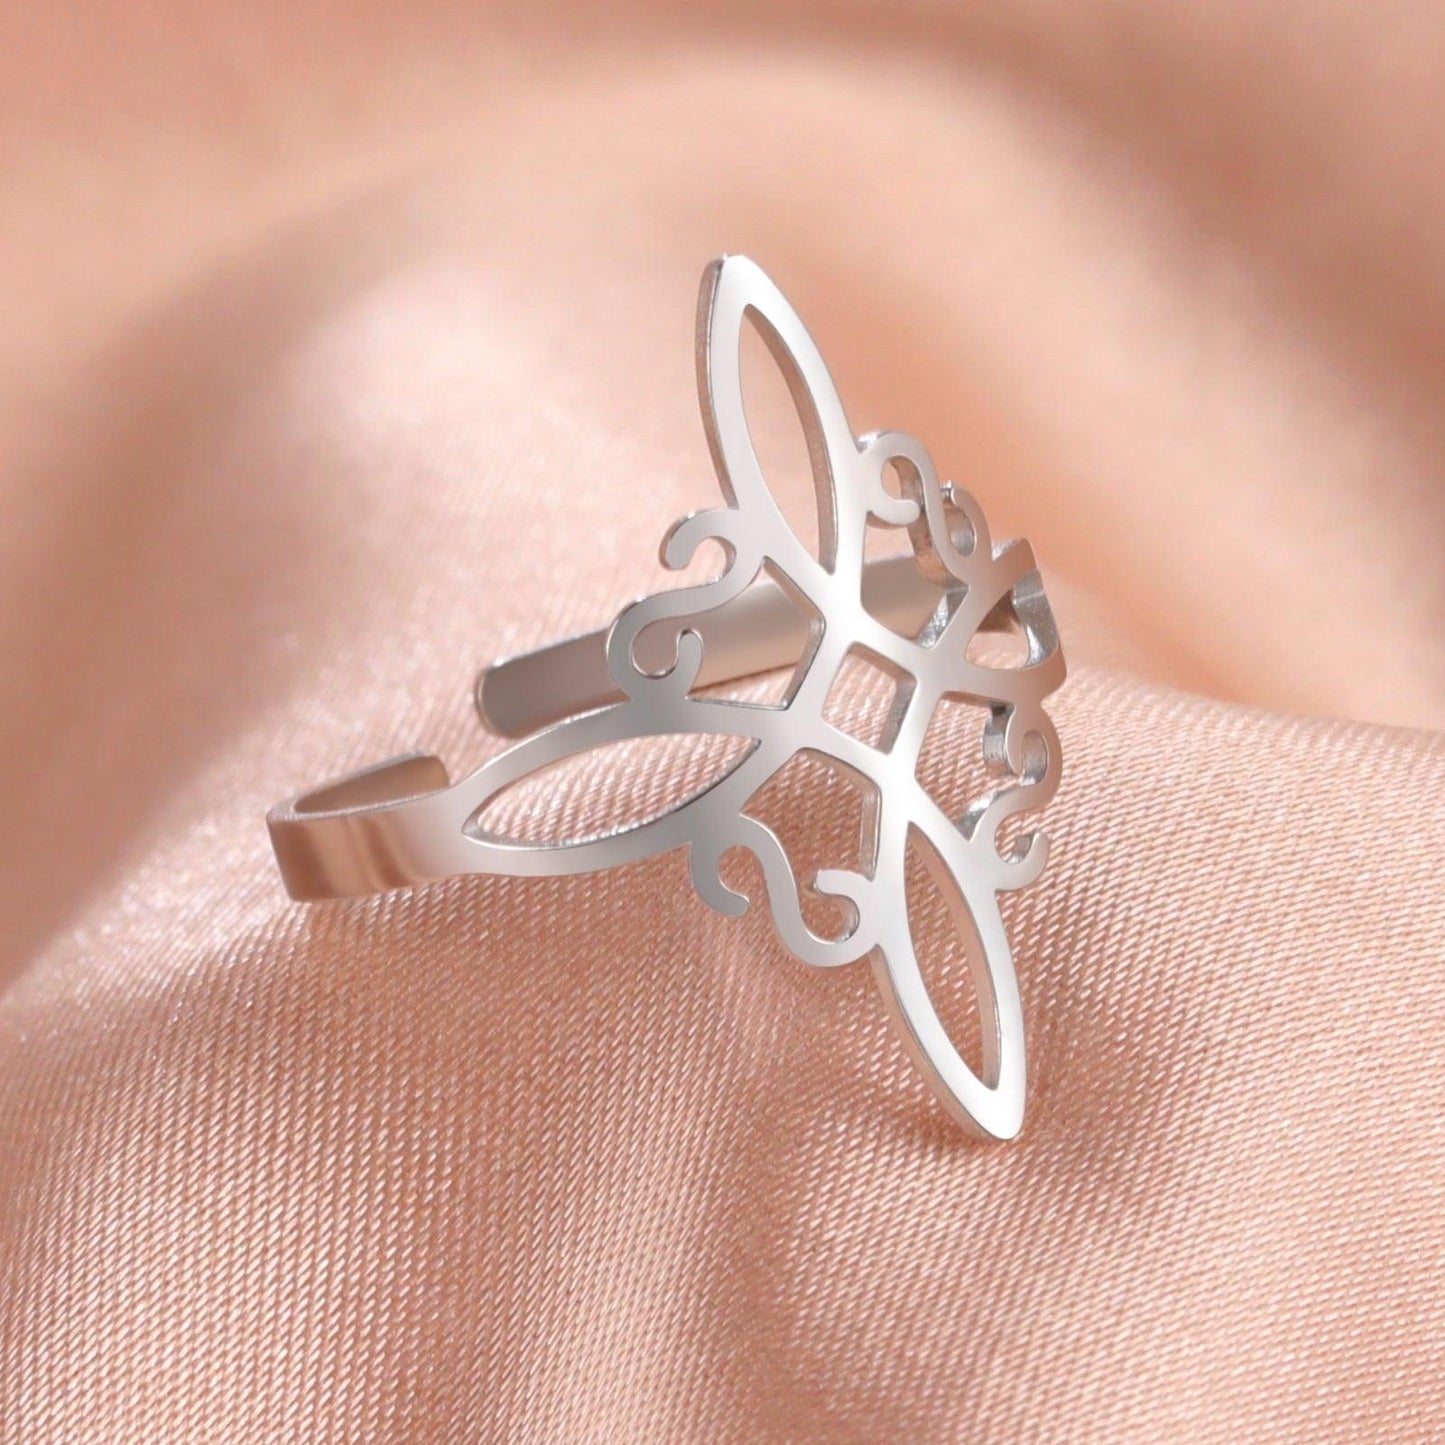 Skyrim Witch Knot Ring Rings - The Burner Shop